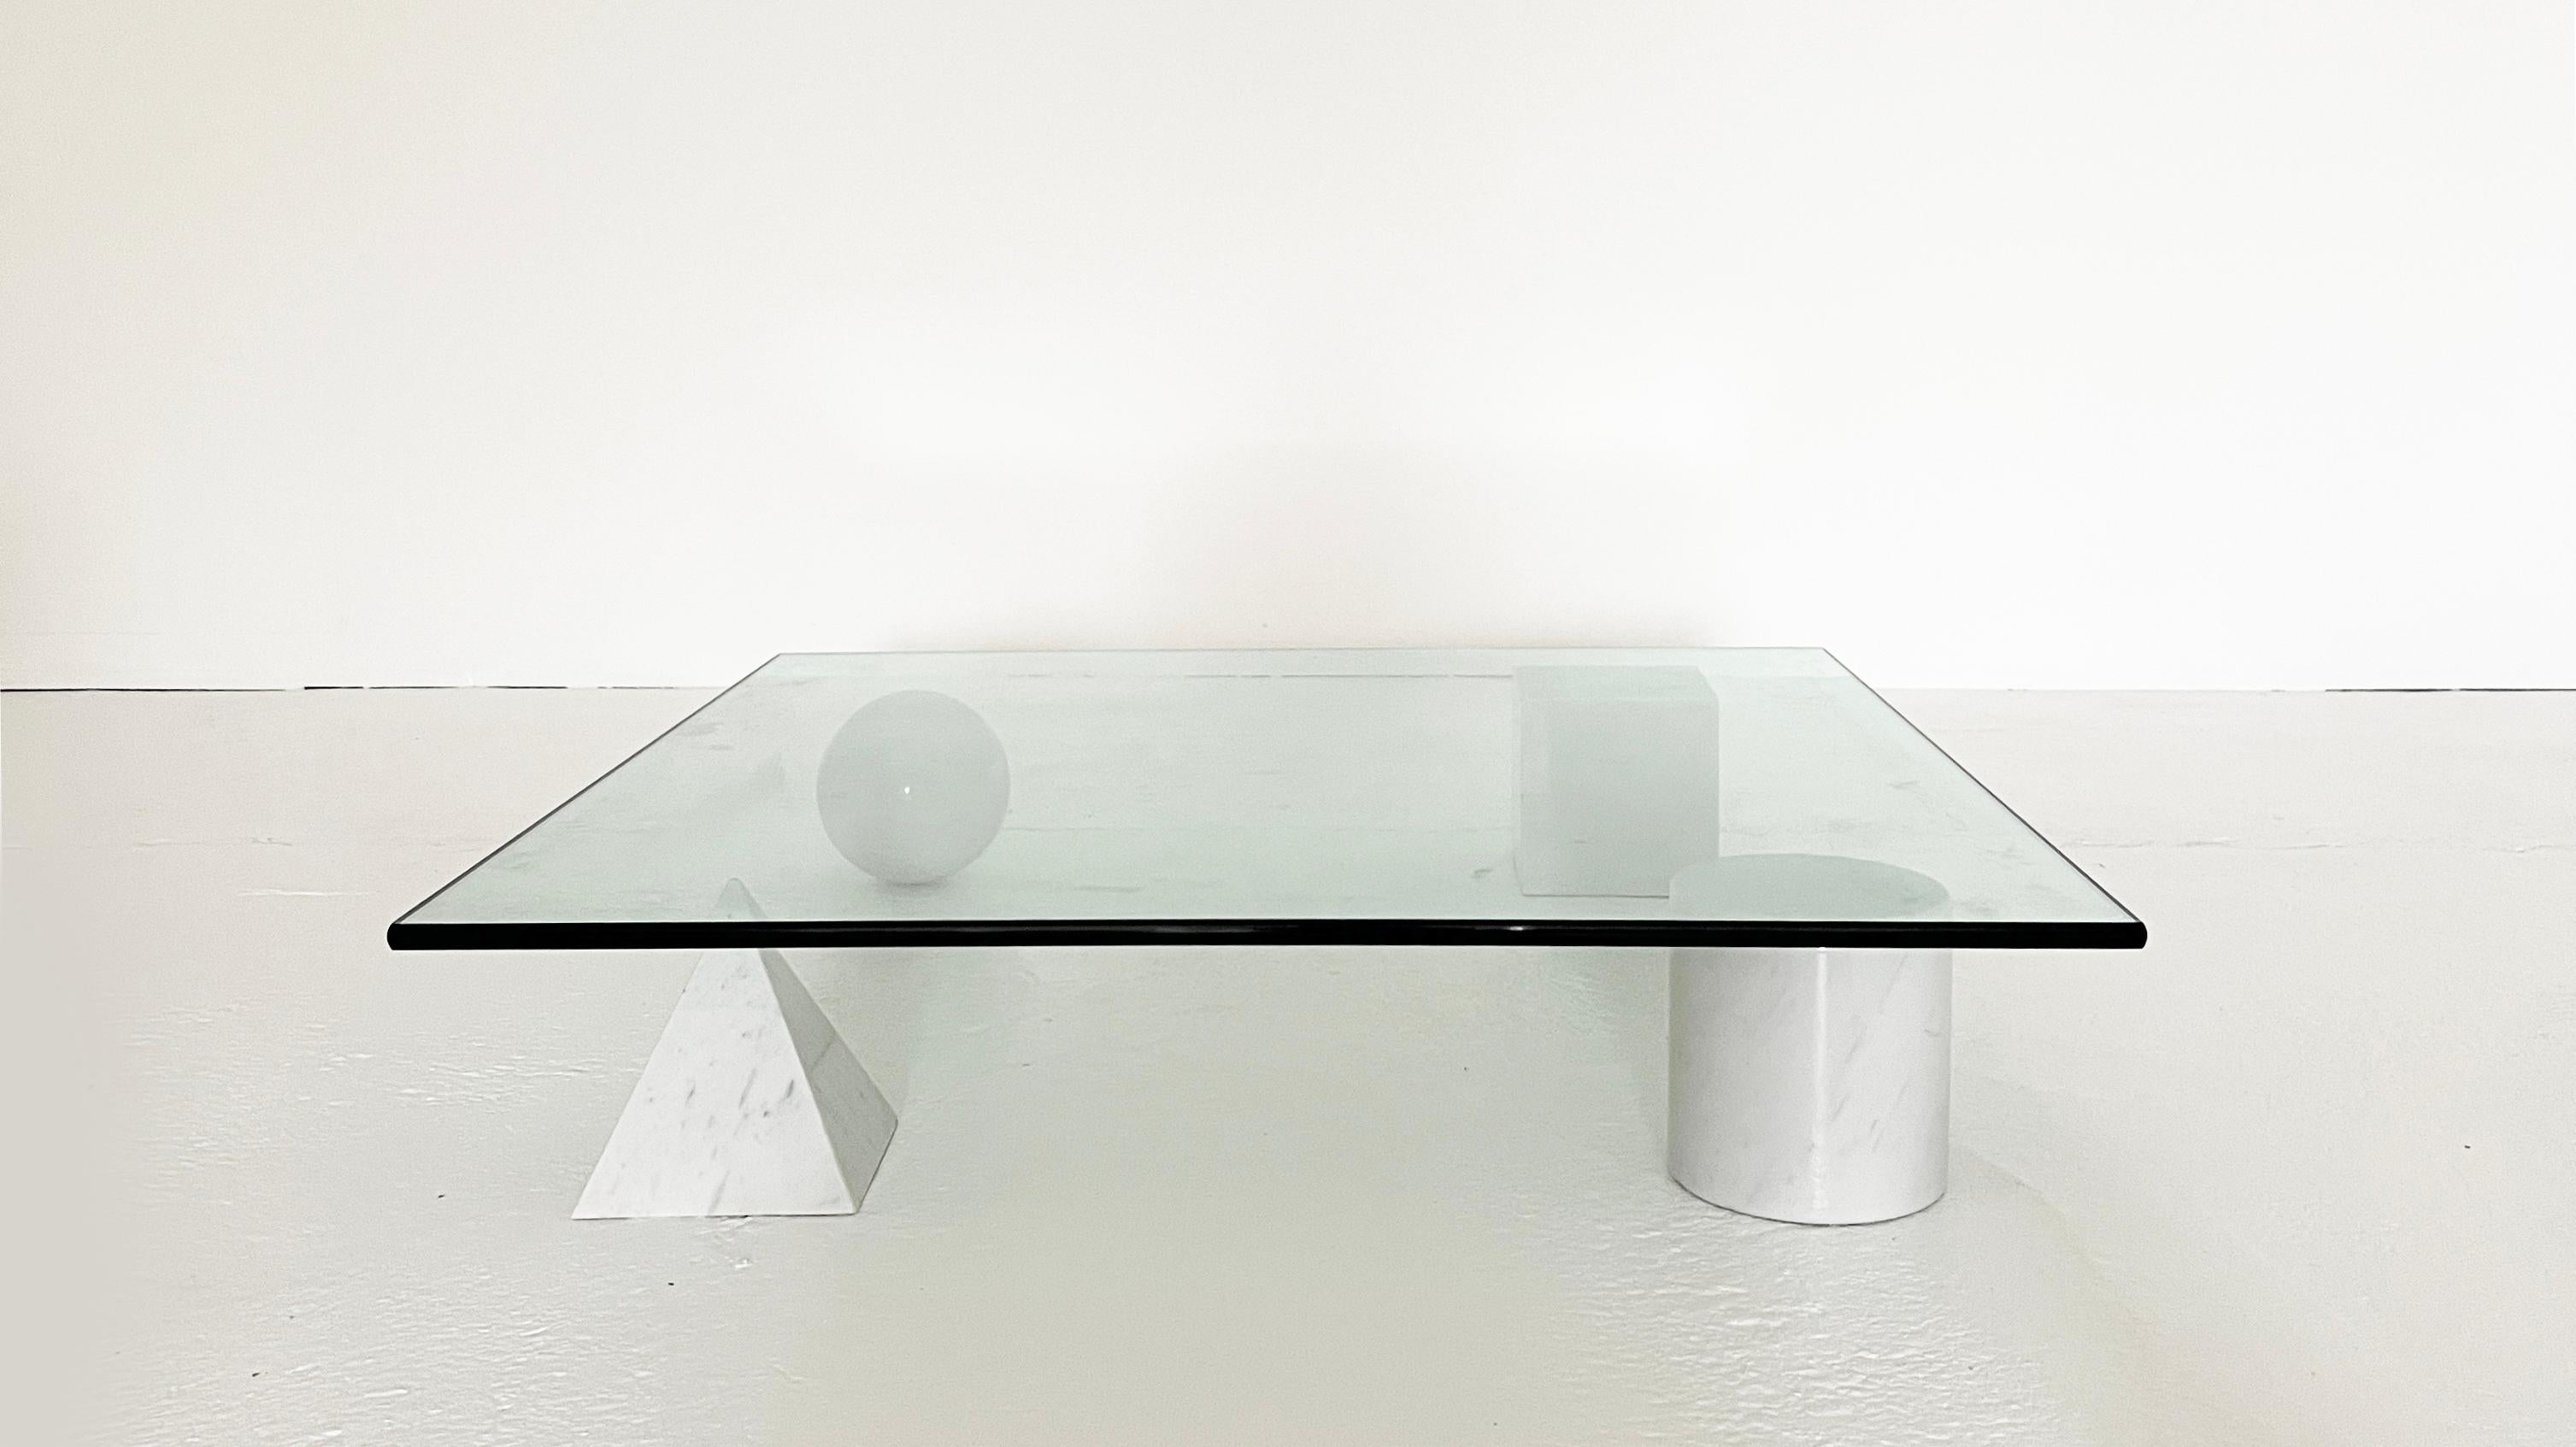 The four forms of the geometry, the cube, the cylinder, the sphere and the pyramid, made of white marble, represent the basis of the table finished with a heavy top sheet of transparent glass.

The four elements can be positioned freely,